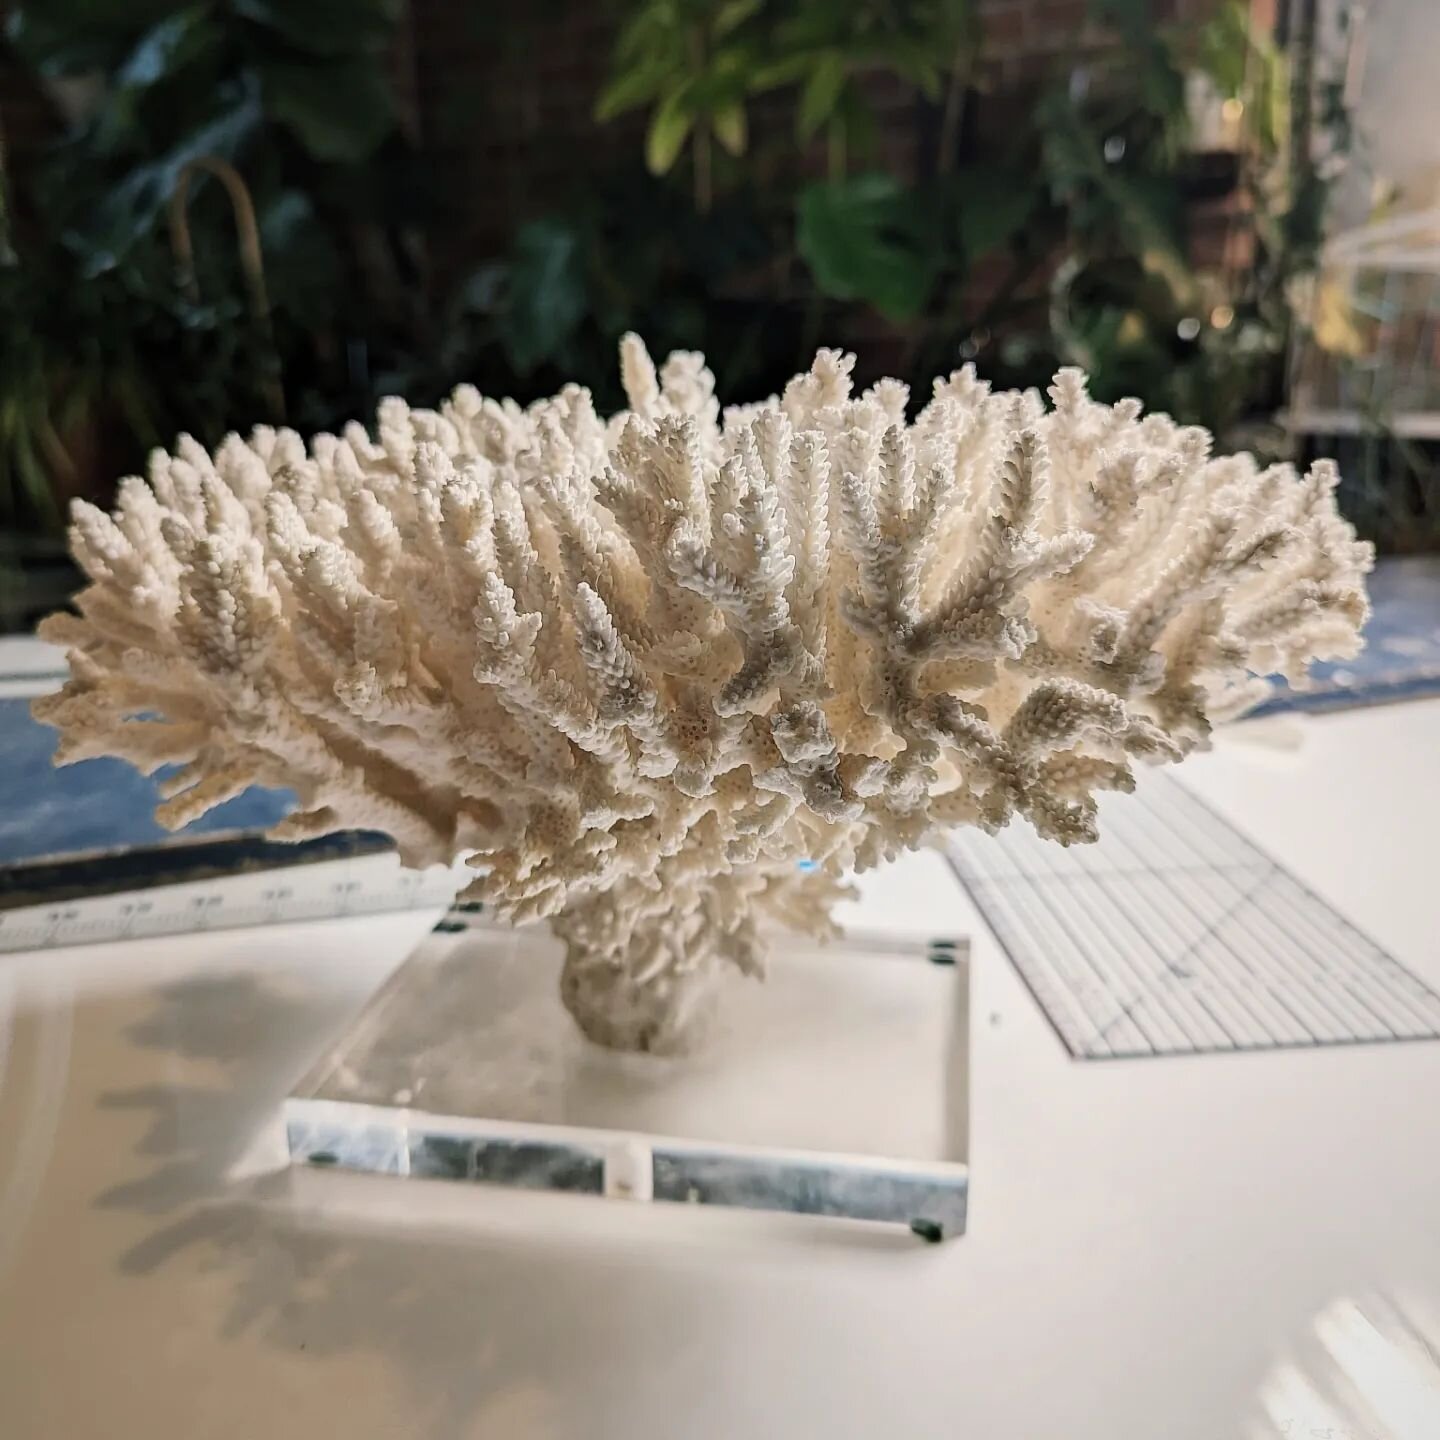 /// This bargain priced piece of beautiful coral listed on Craigslist called to me during this week of arctic sub-zero temps. Braved the cold to add it to my collection...so worth it.